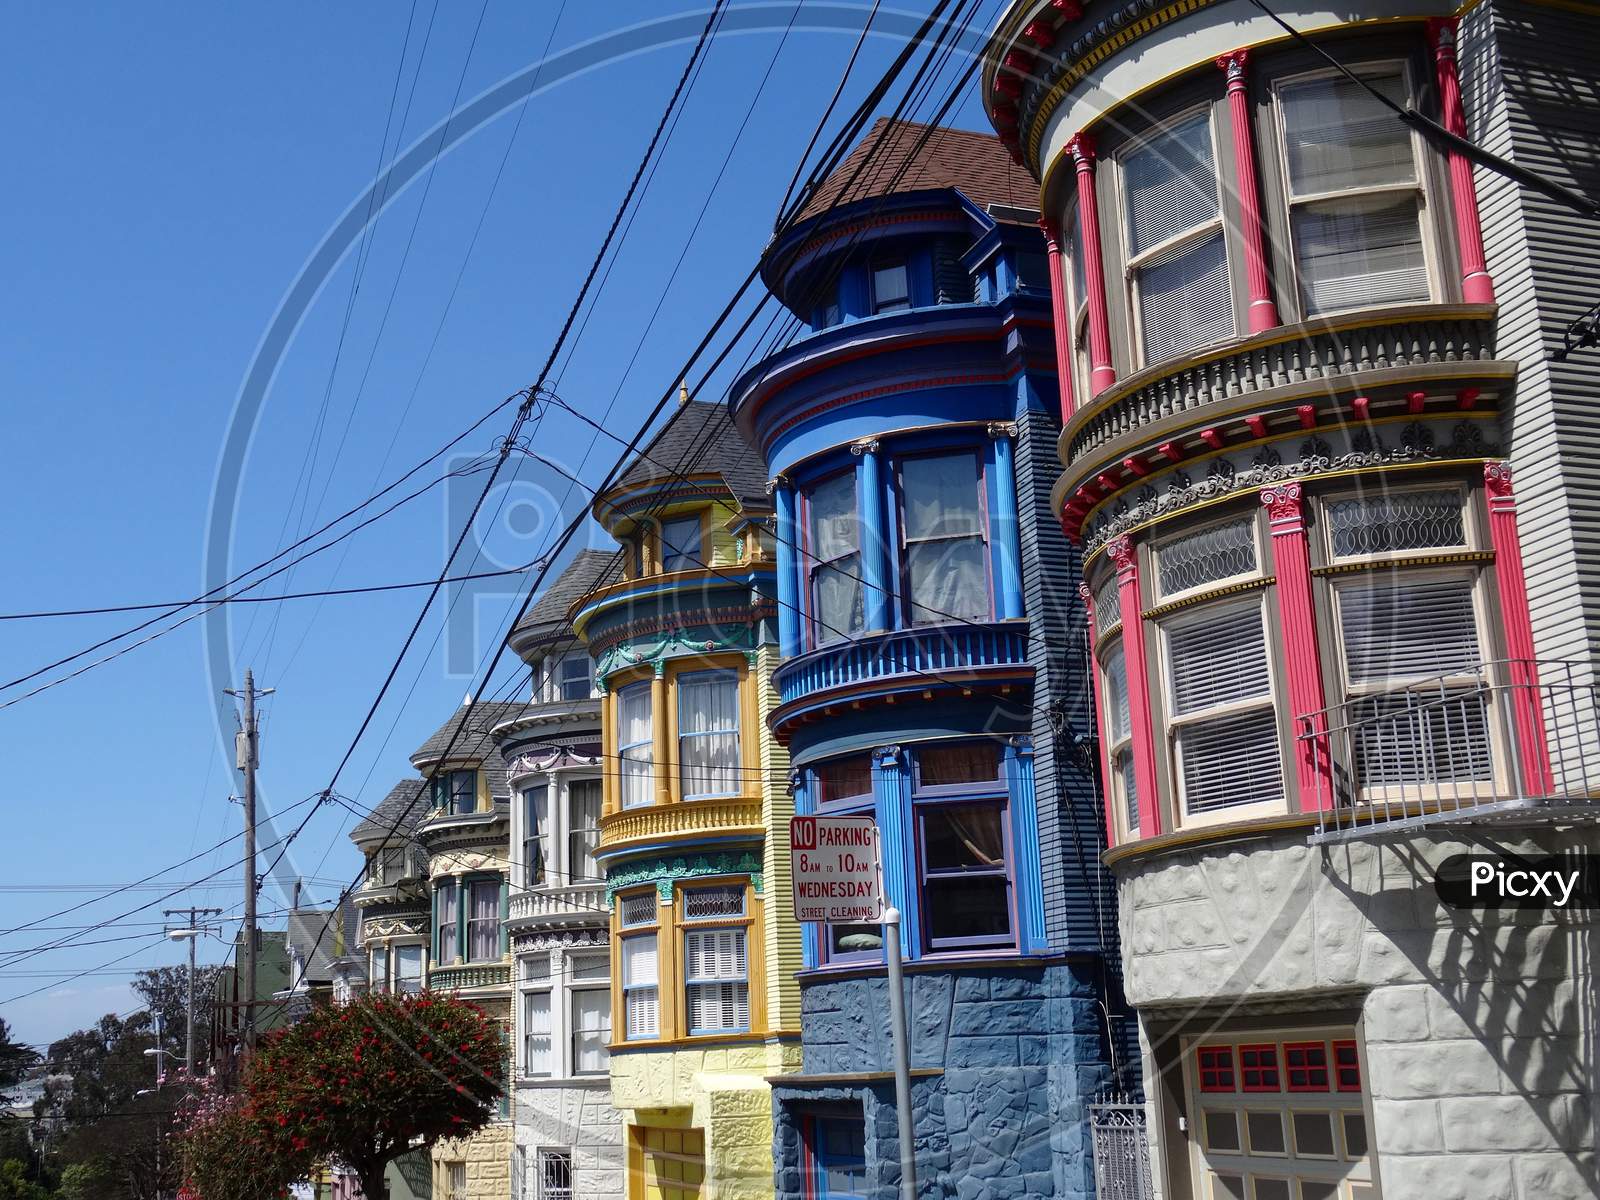 Beautiful Colored Houses Of The Haight & Ashbury District In San Francisco